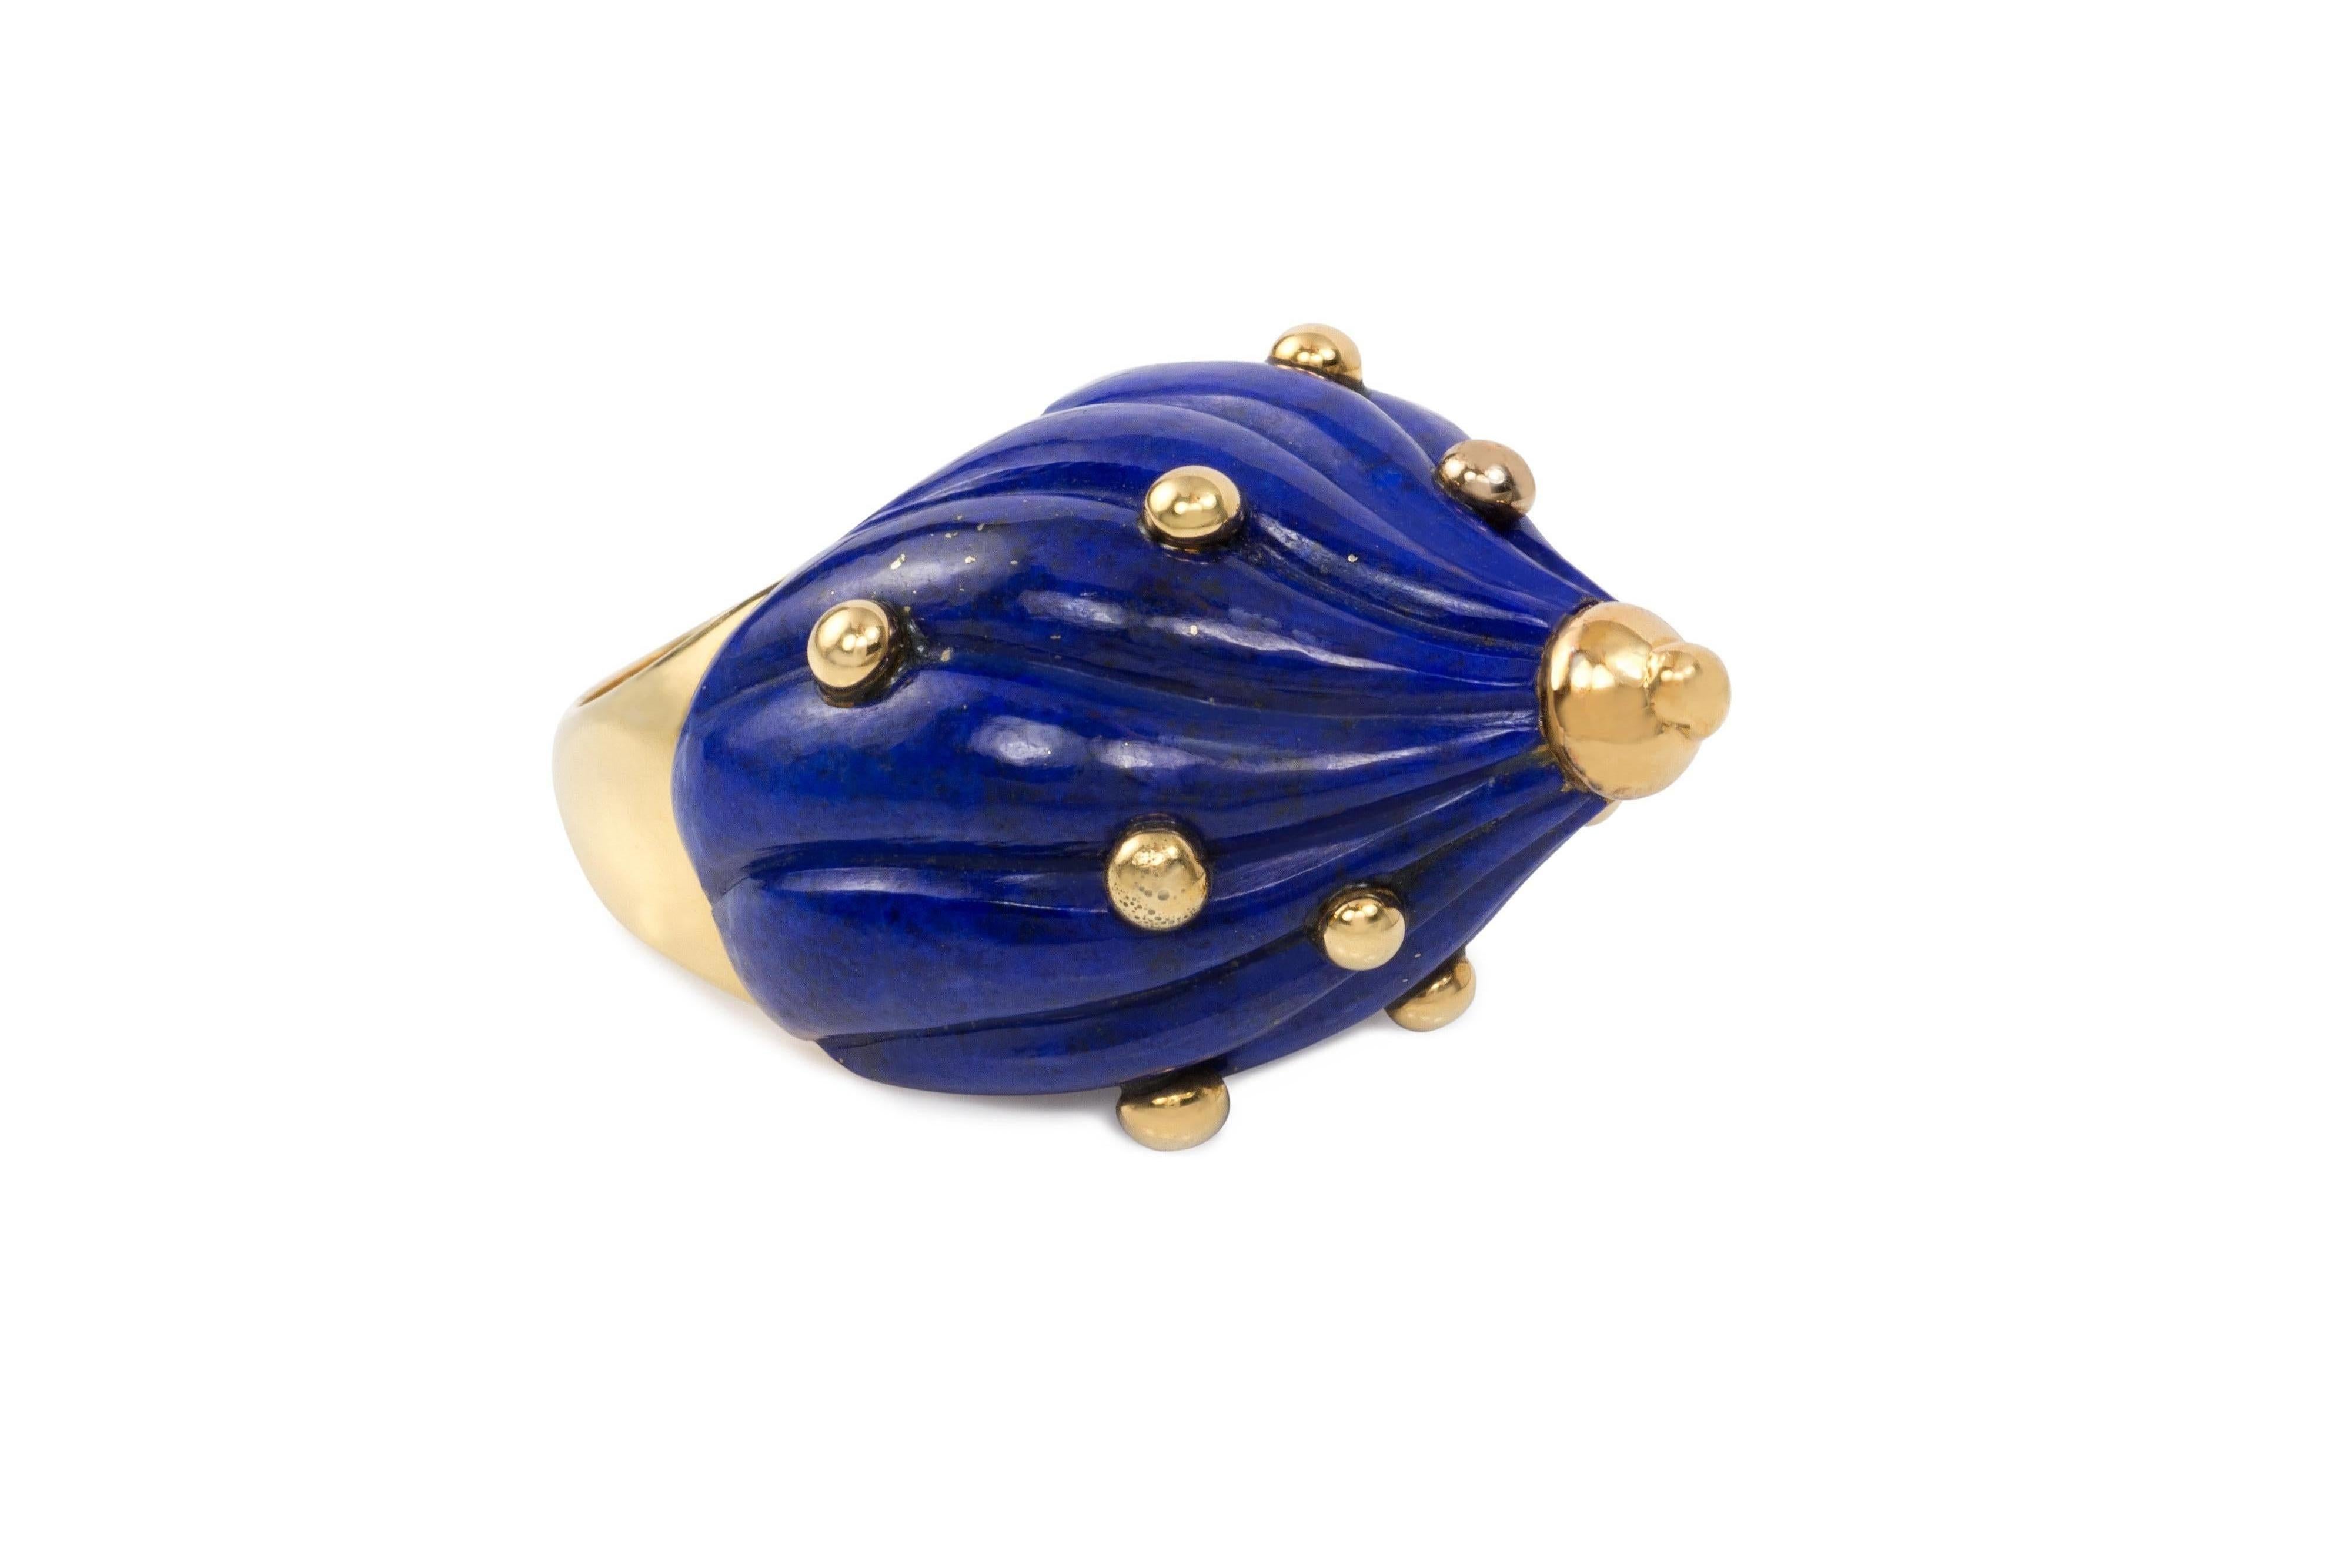 A hand carved, unique lapis lazuli and 18 karat gold dome ring, by British jewelry artist E.J. Shewry, 1968. Ring size is 7.75  London hallmarks with the letter 